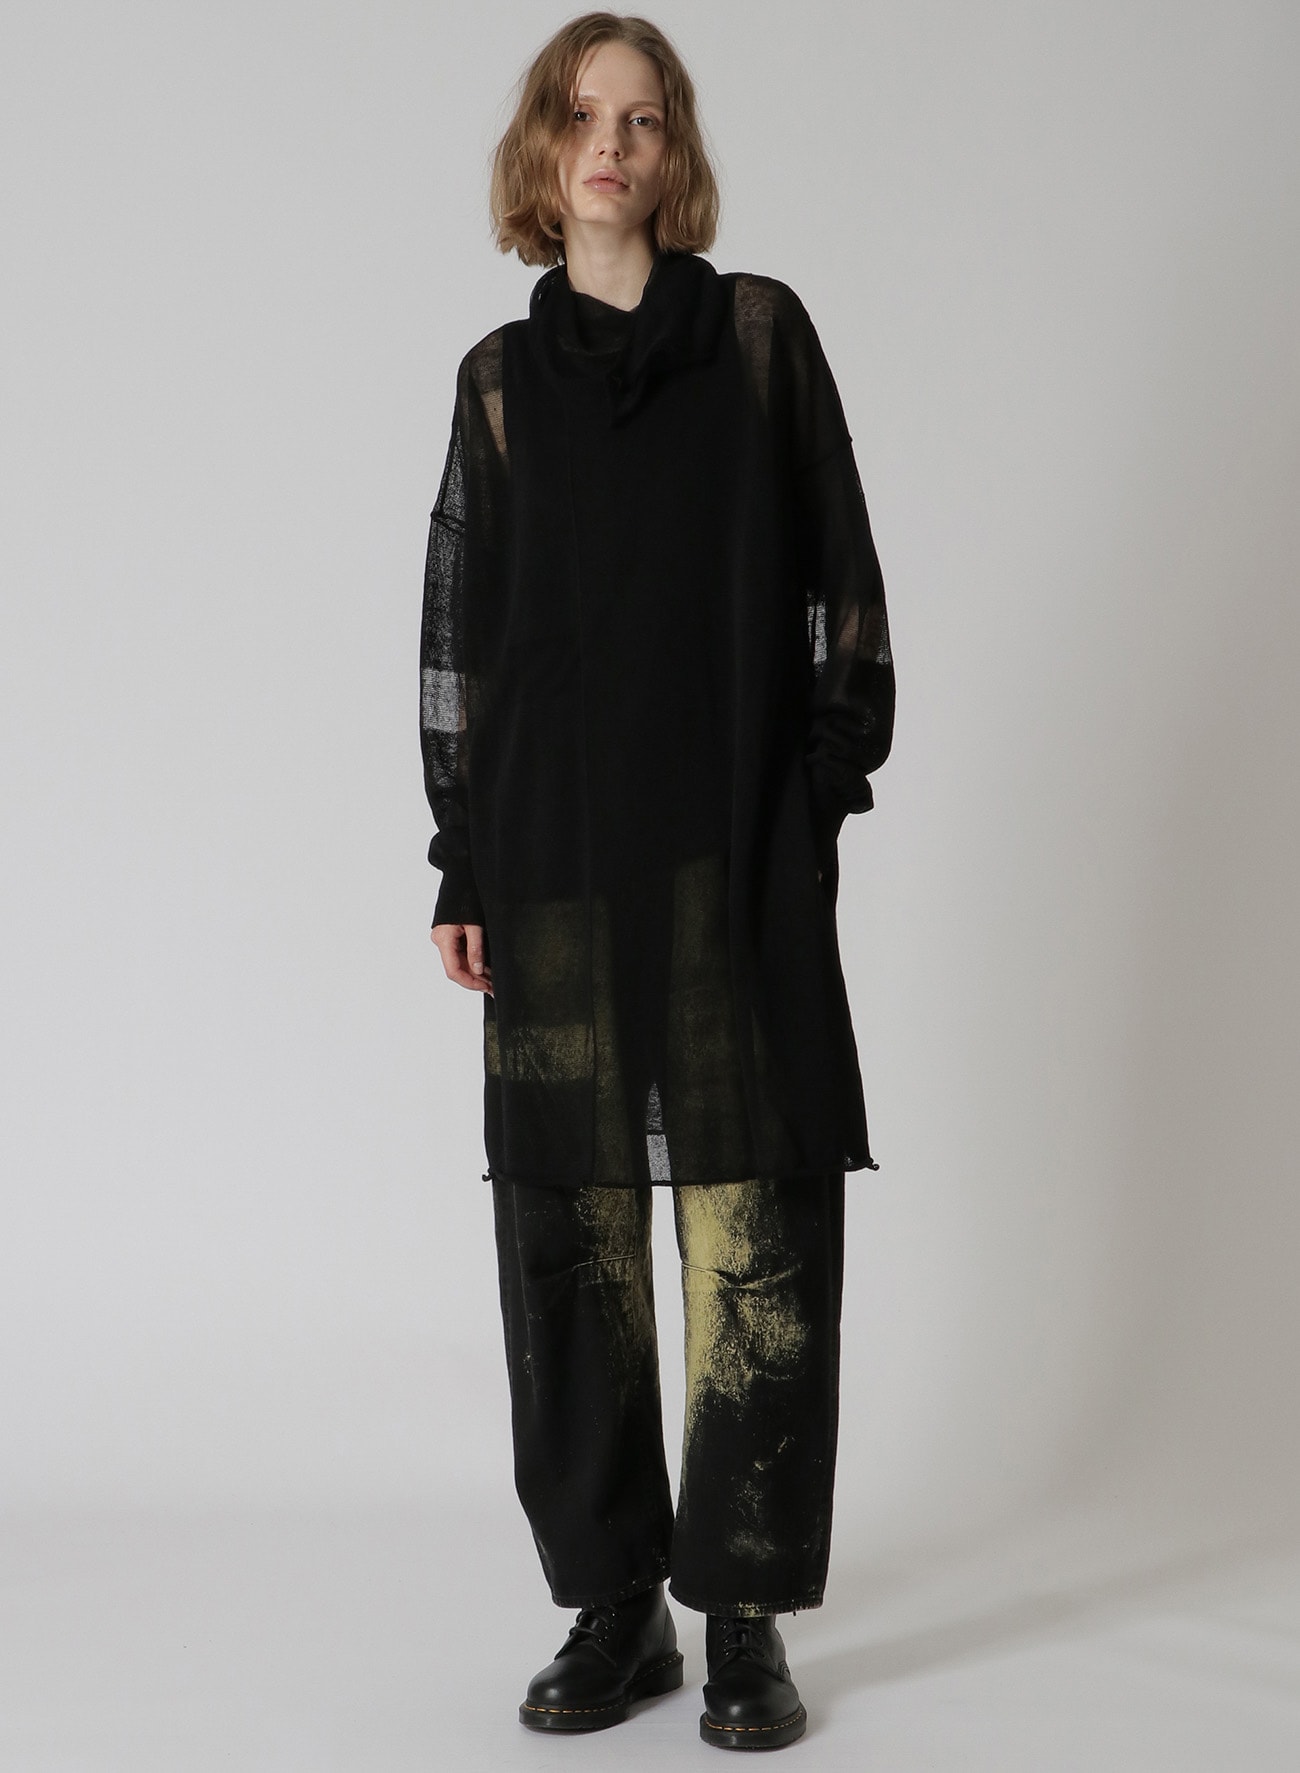 PLAIN STITCH SHEER LOOSE-FIT PULLOVER	